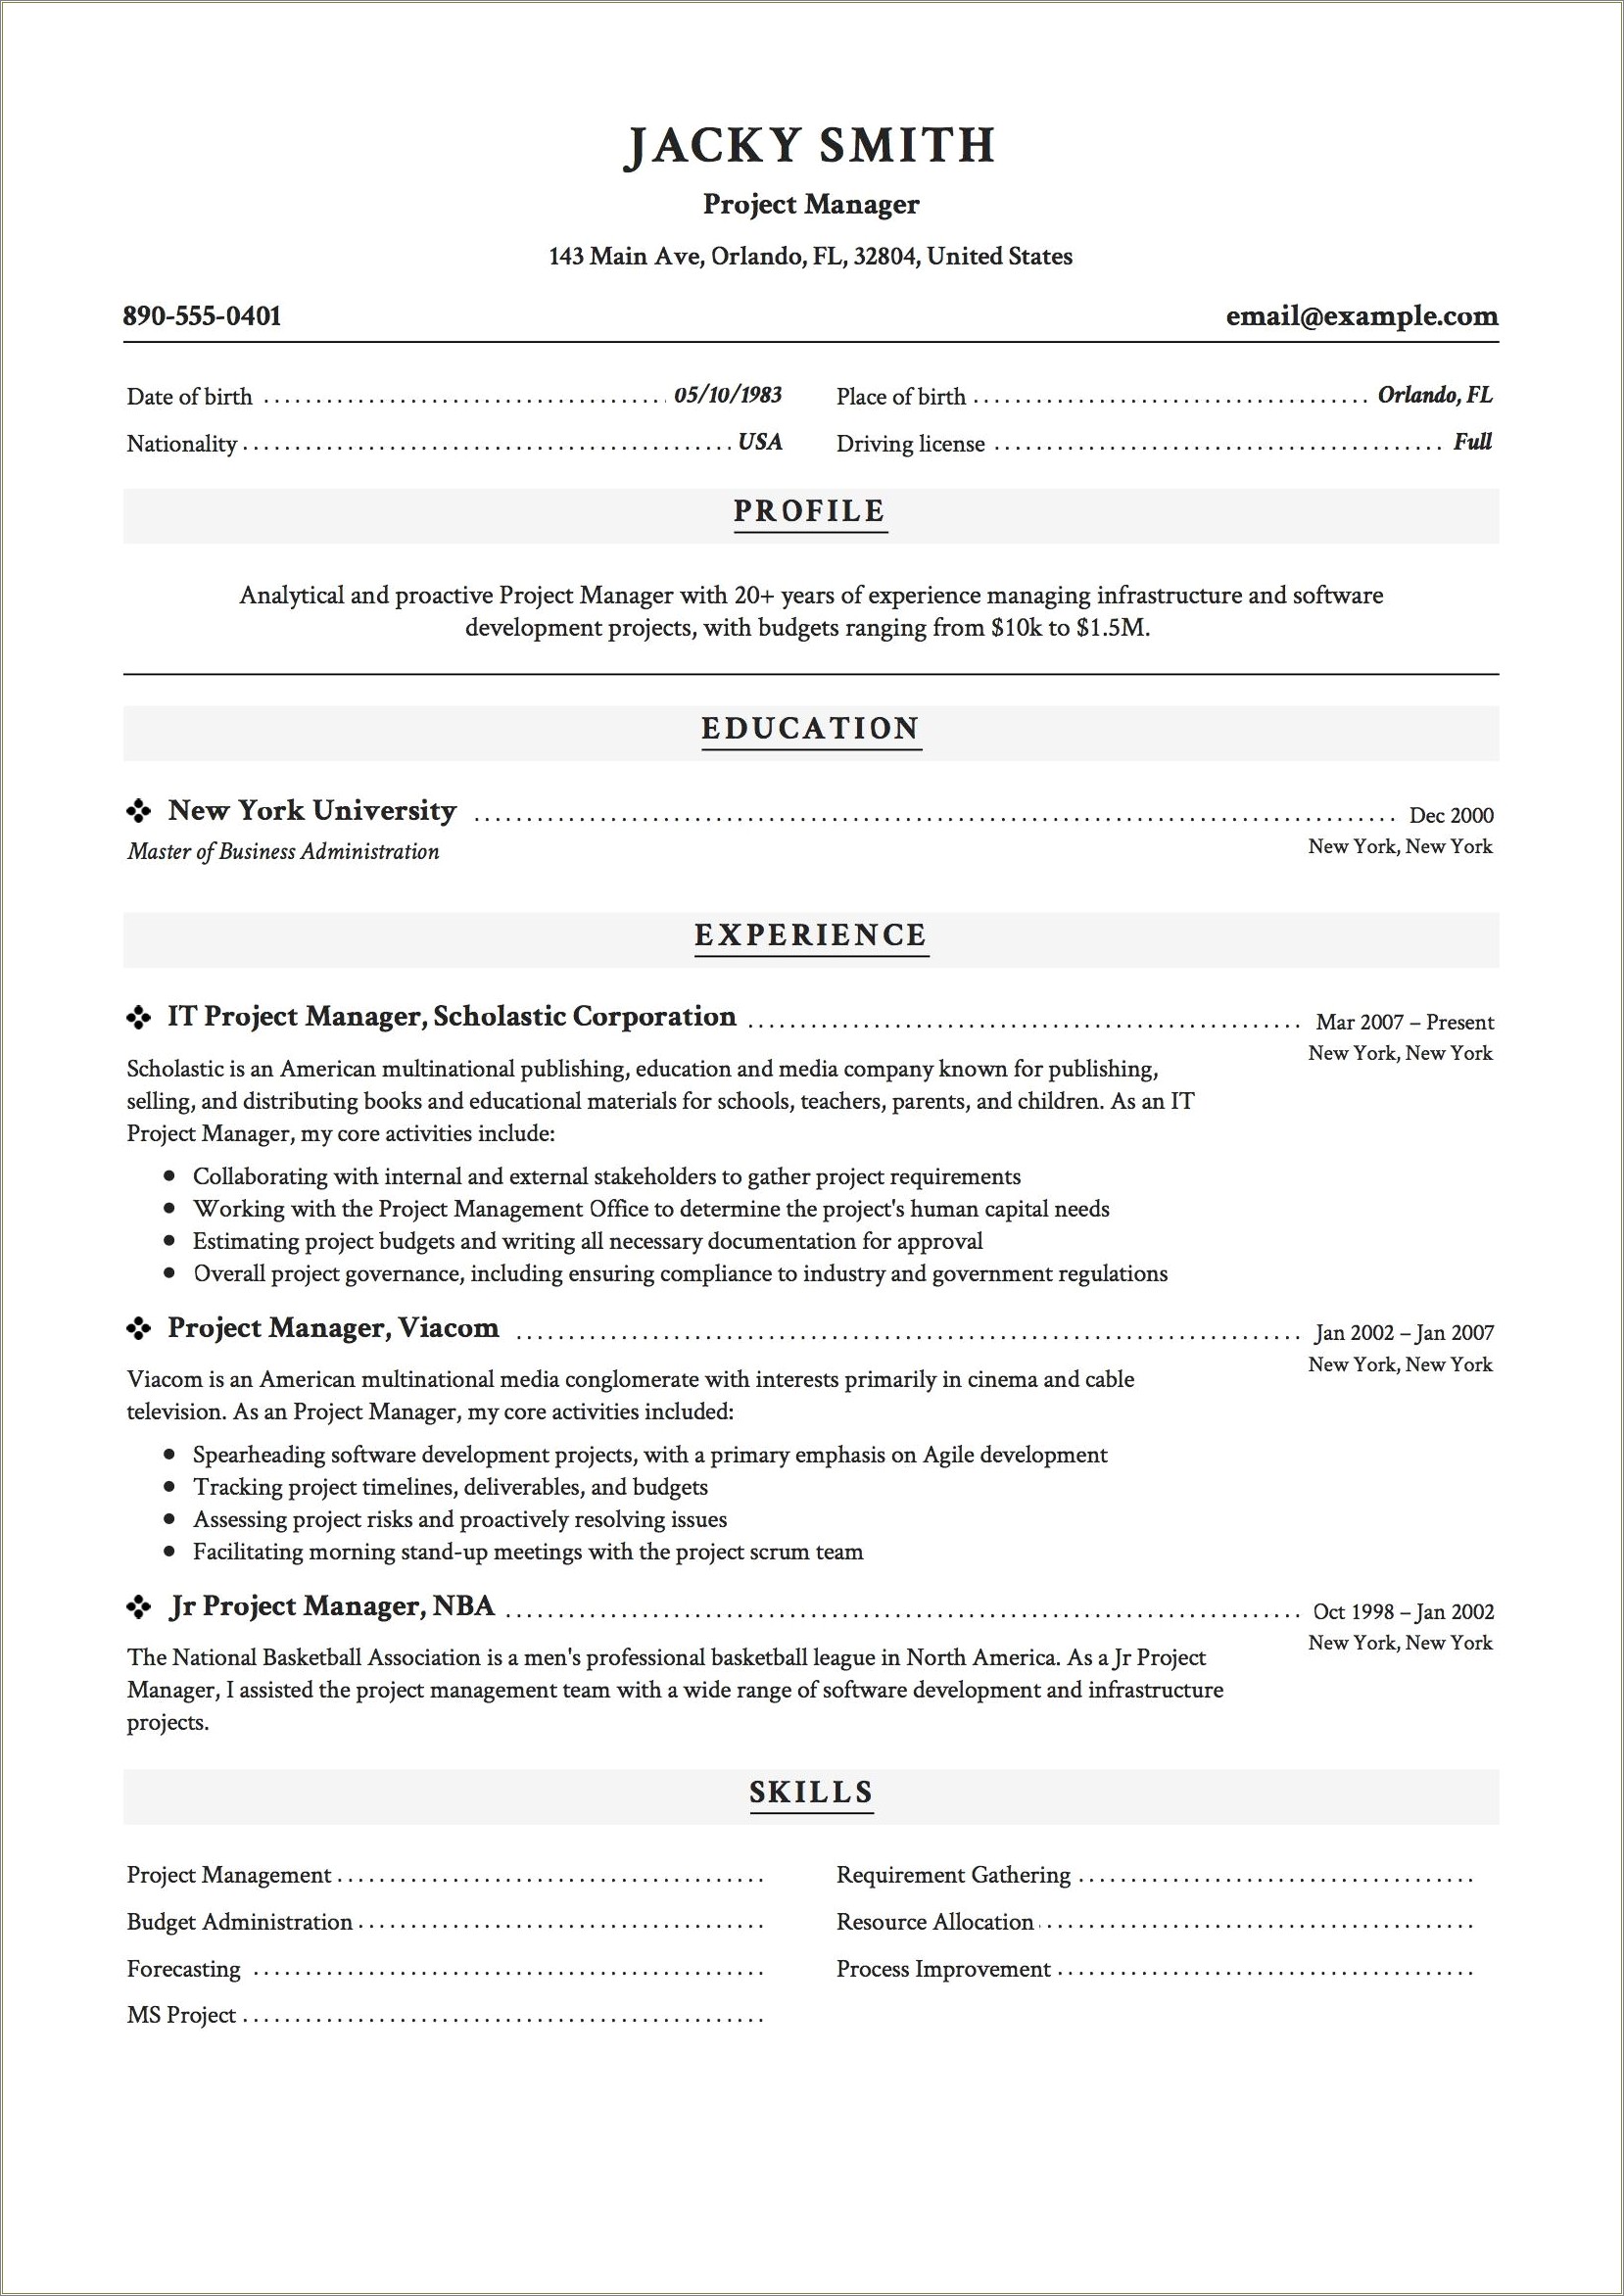 Sample Construction Operations Manager Resume